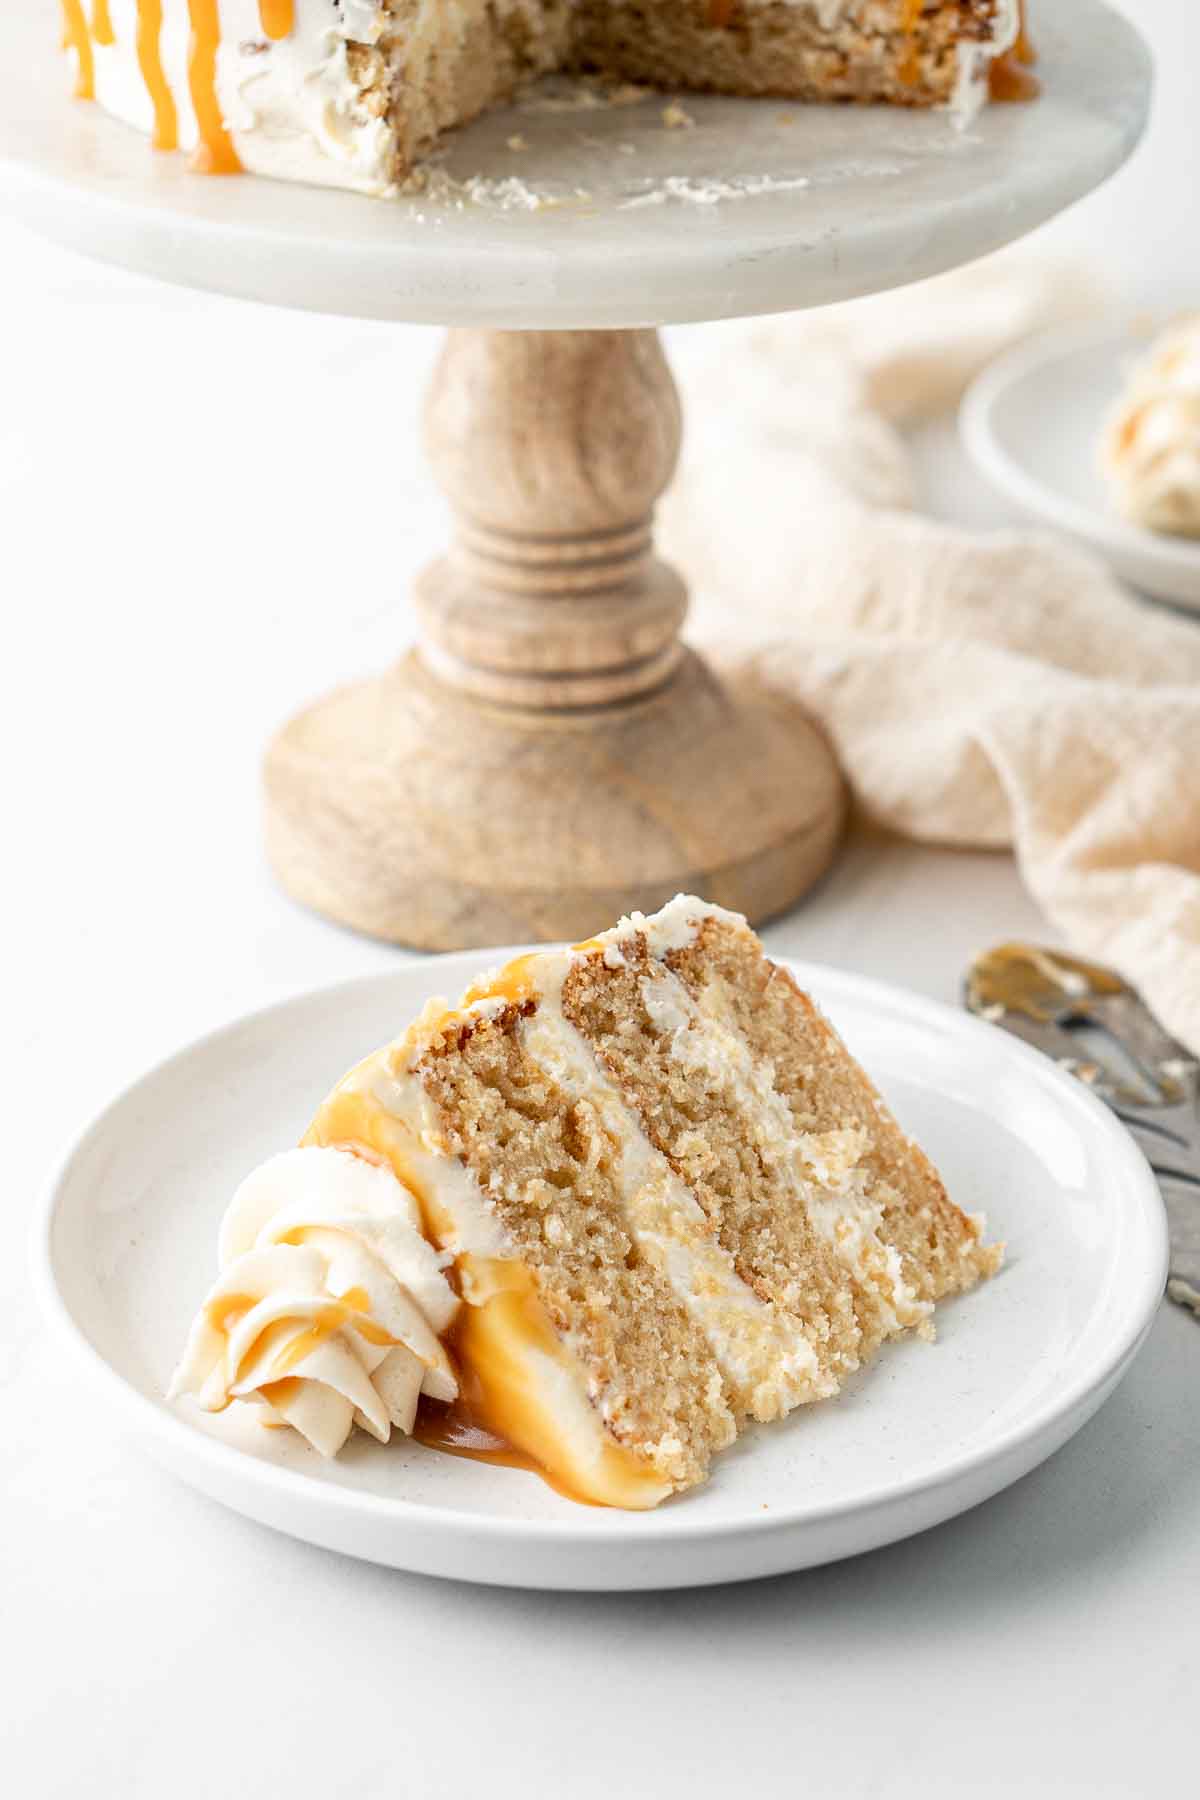 Slice of caramel cake on a white plate with the cake stand in the background.